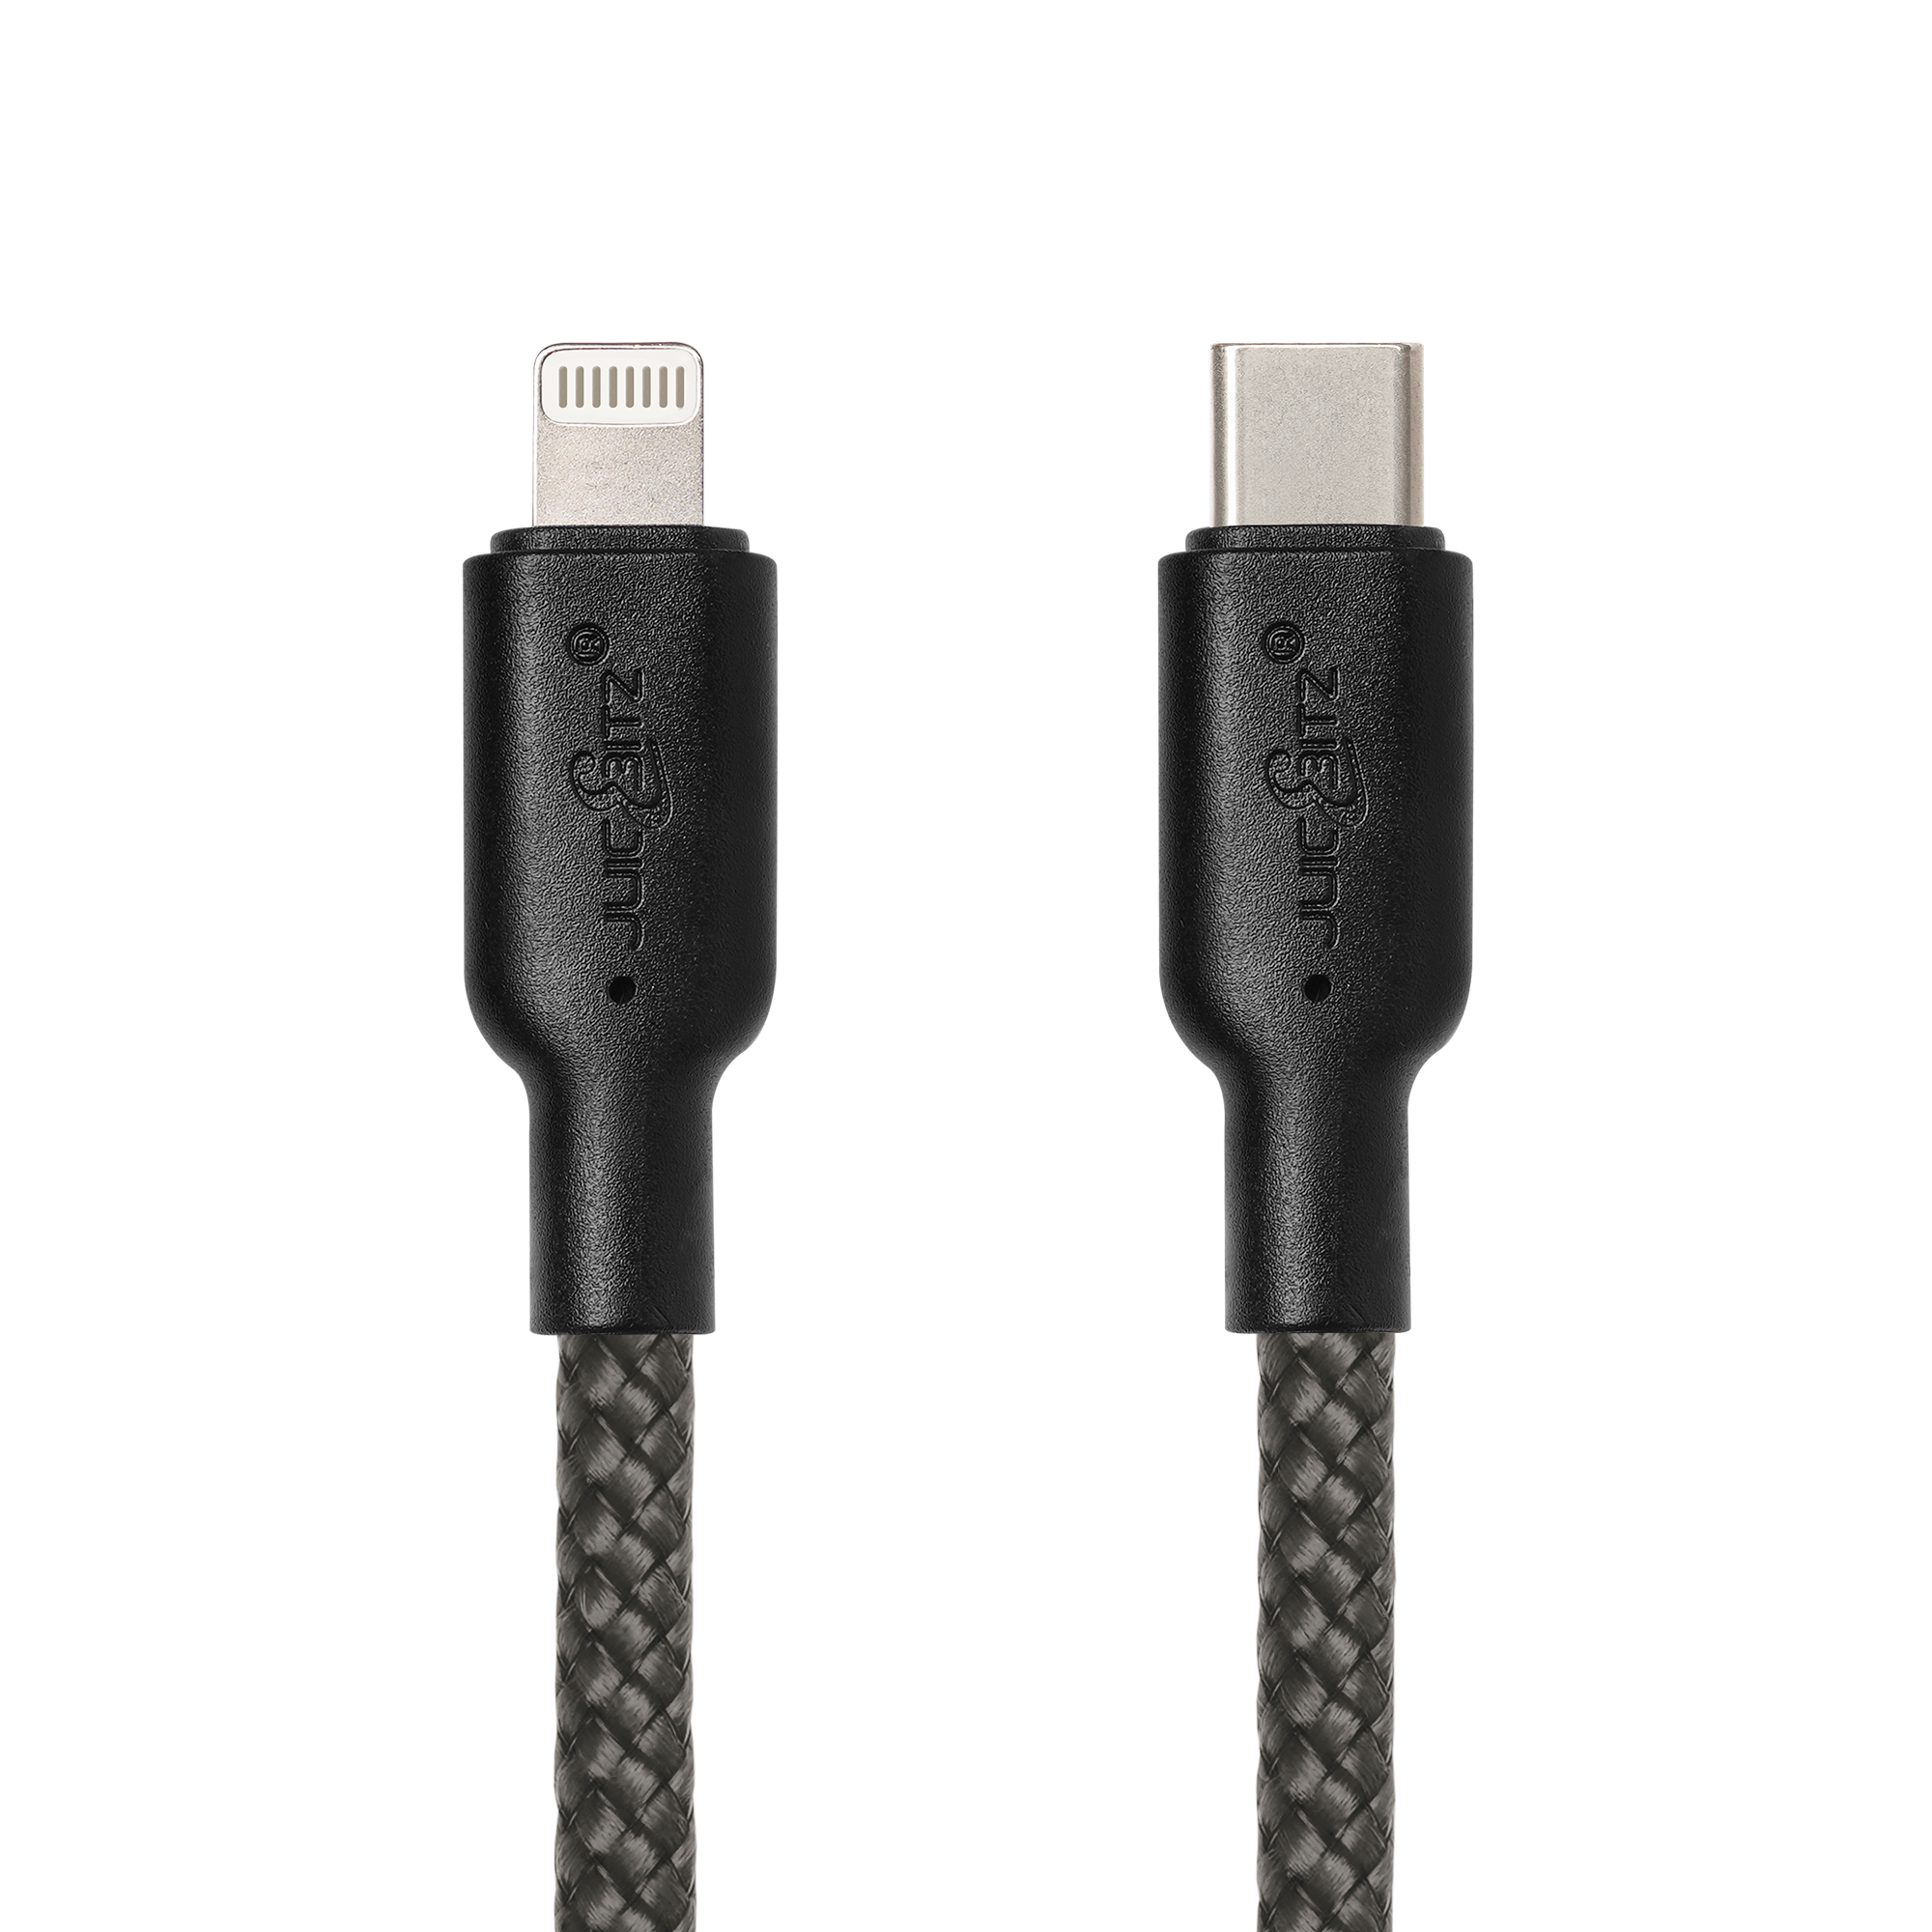 Braided Heavy Duty USB-C Fast Charger Data Sync Cable for iPhone, iPad, iPod - Grey